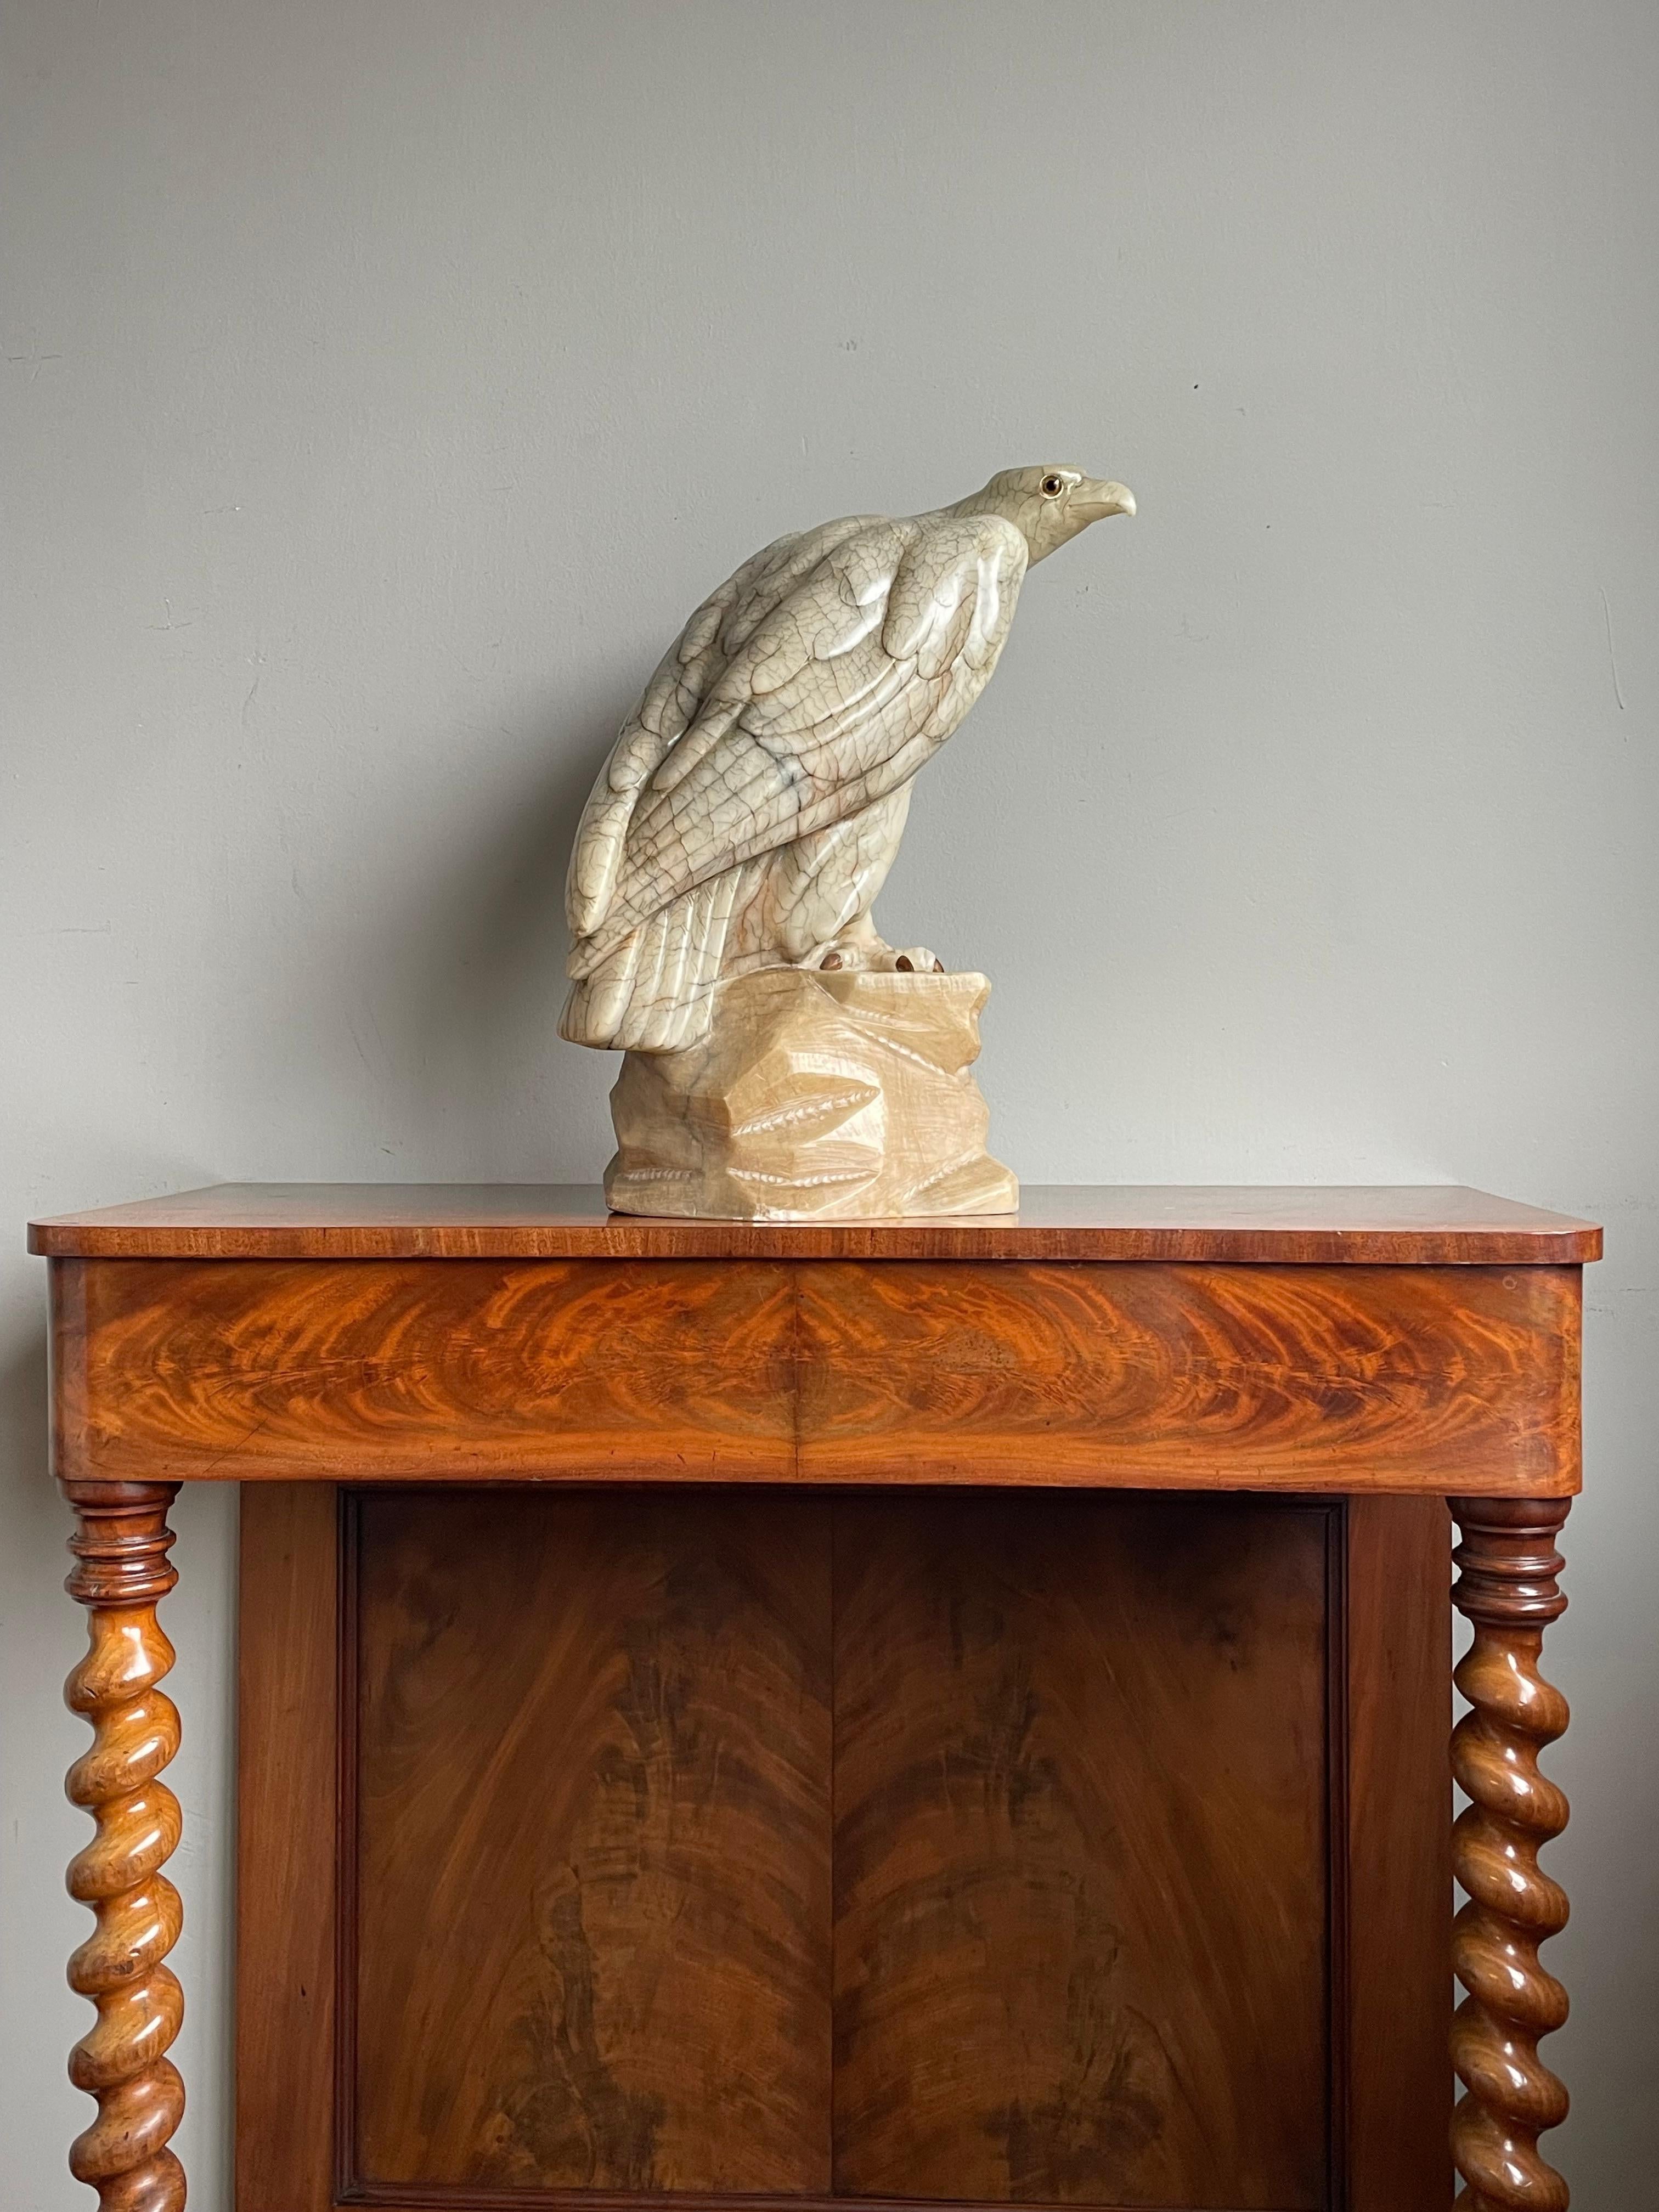 Magnificent hand-carved eagle on a rock sculpture.

Most people are not capable of drawing a picture of an eagle, but this artist has sculpted a majestic and lifelike eagle out of a single rock of alabaster. That, to us, is amazing and it takes a